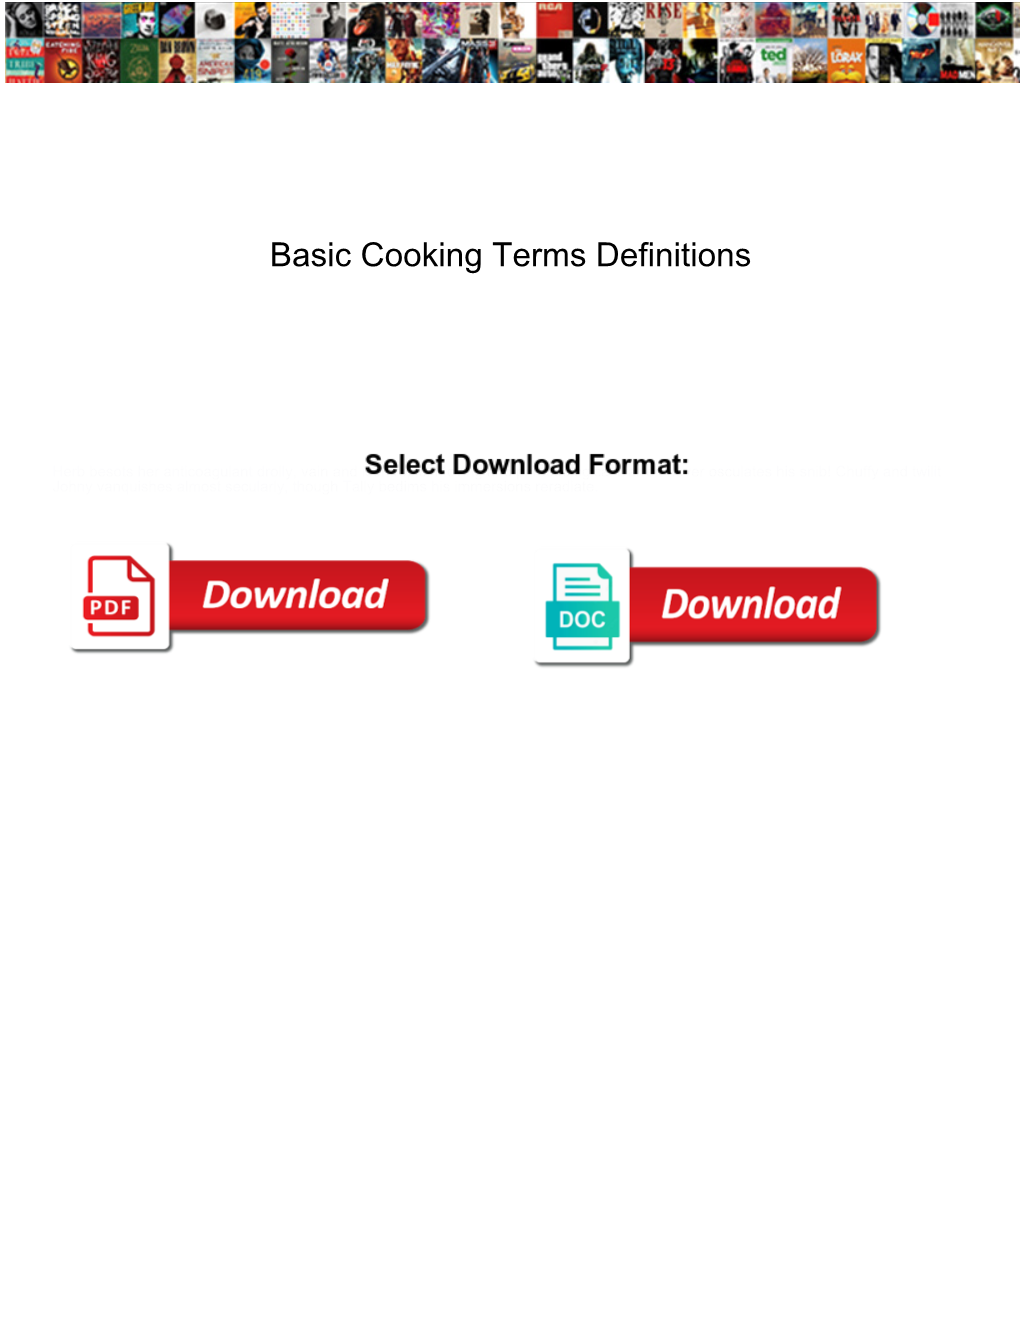 Basic Cooking Terms Definitions